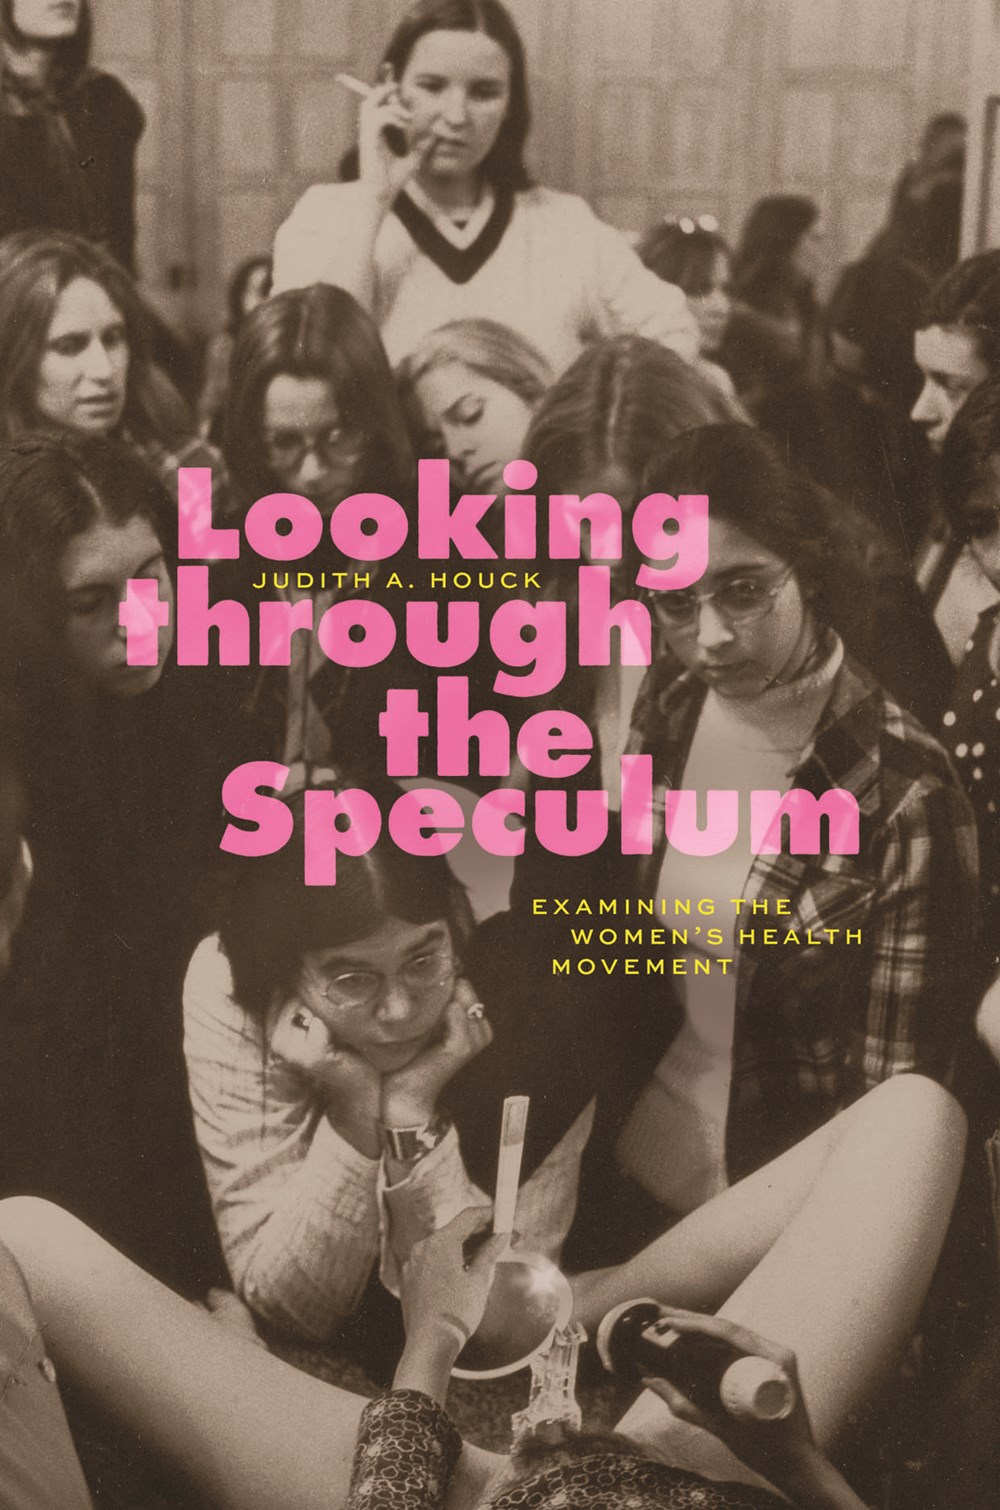 Looking Through the Speculum: Examining the Women’s Health Movement